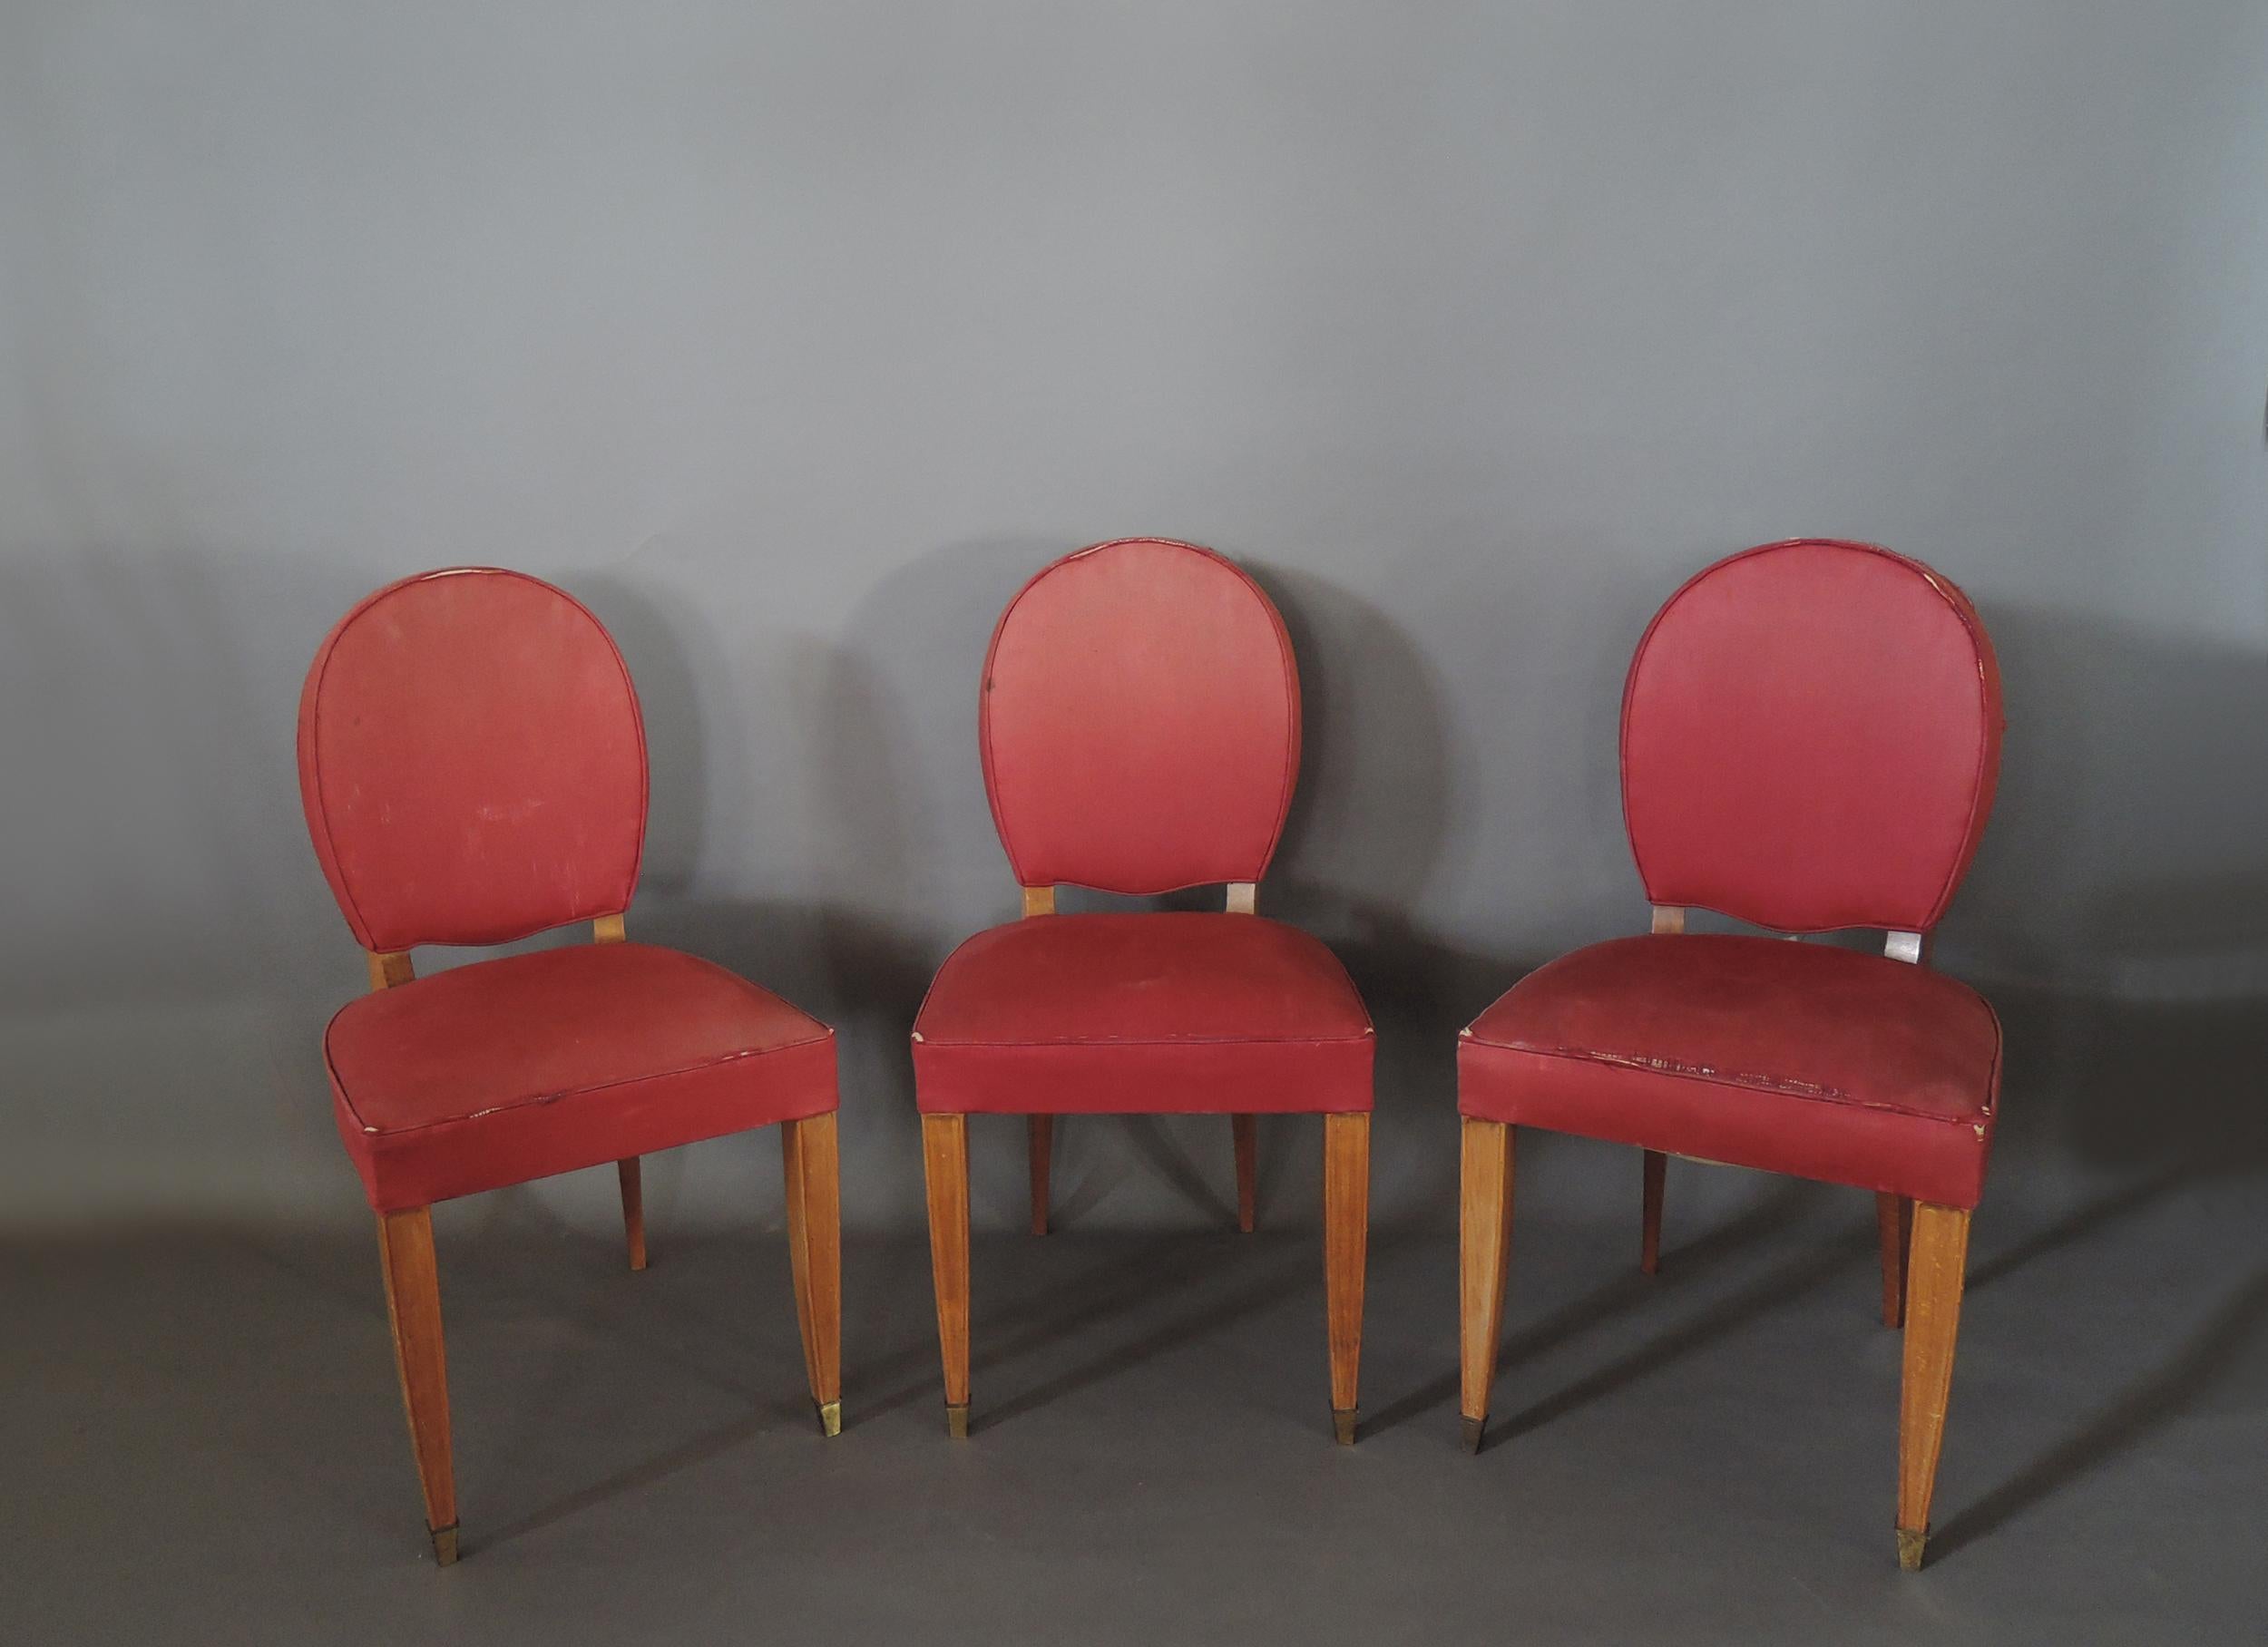 15 Fine French Art Deco Dining Chairs 6